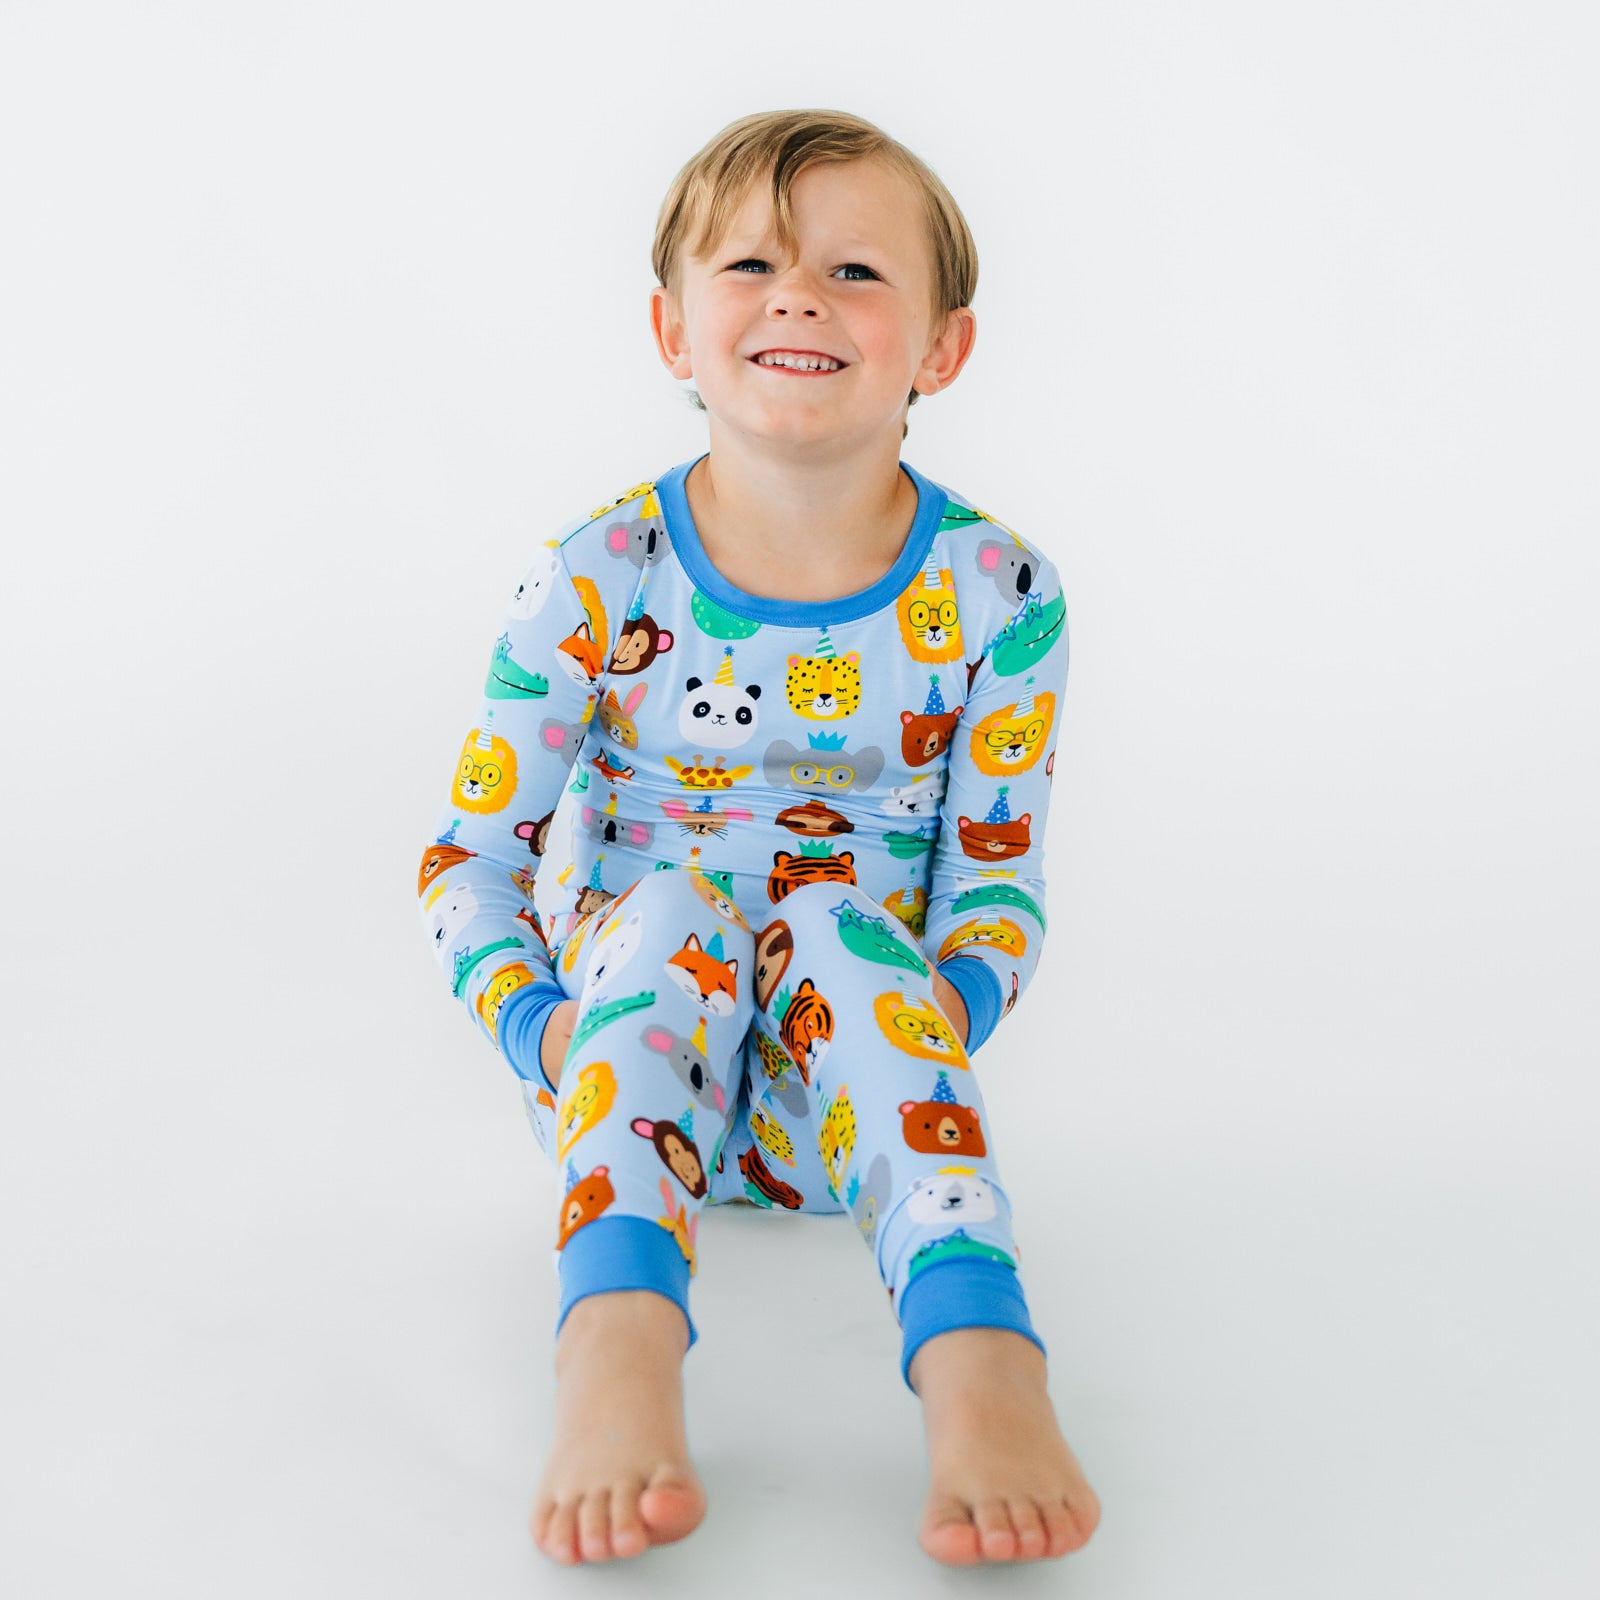 Alternate image of a child sitting wearing Blue Party Pals two piece pj set